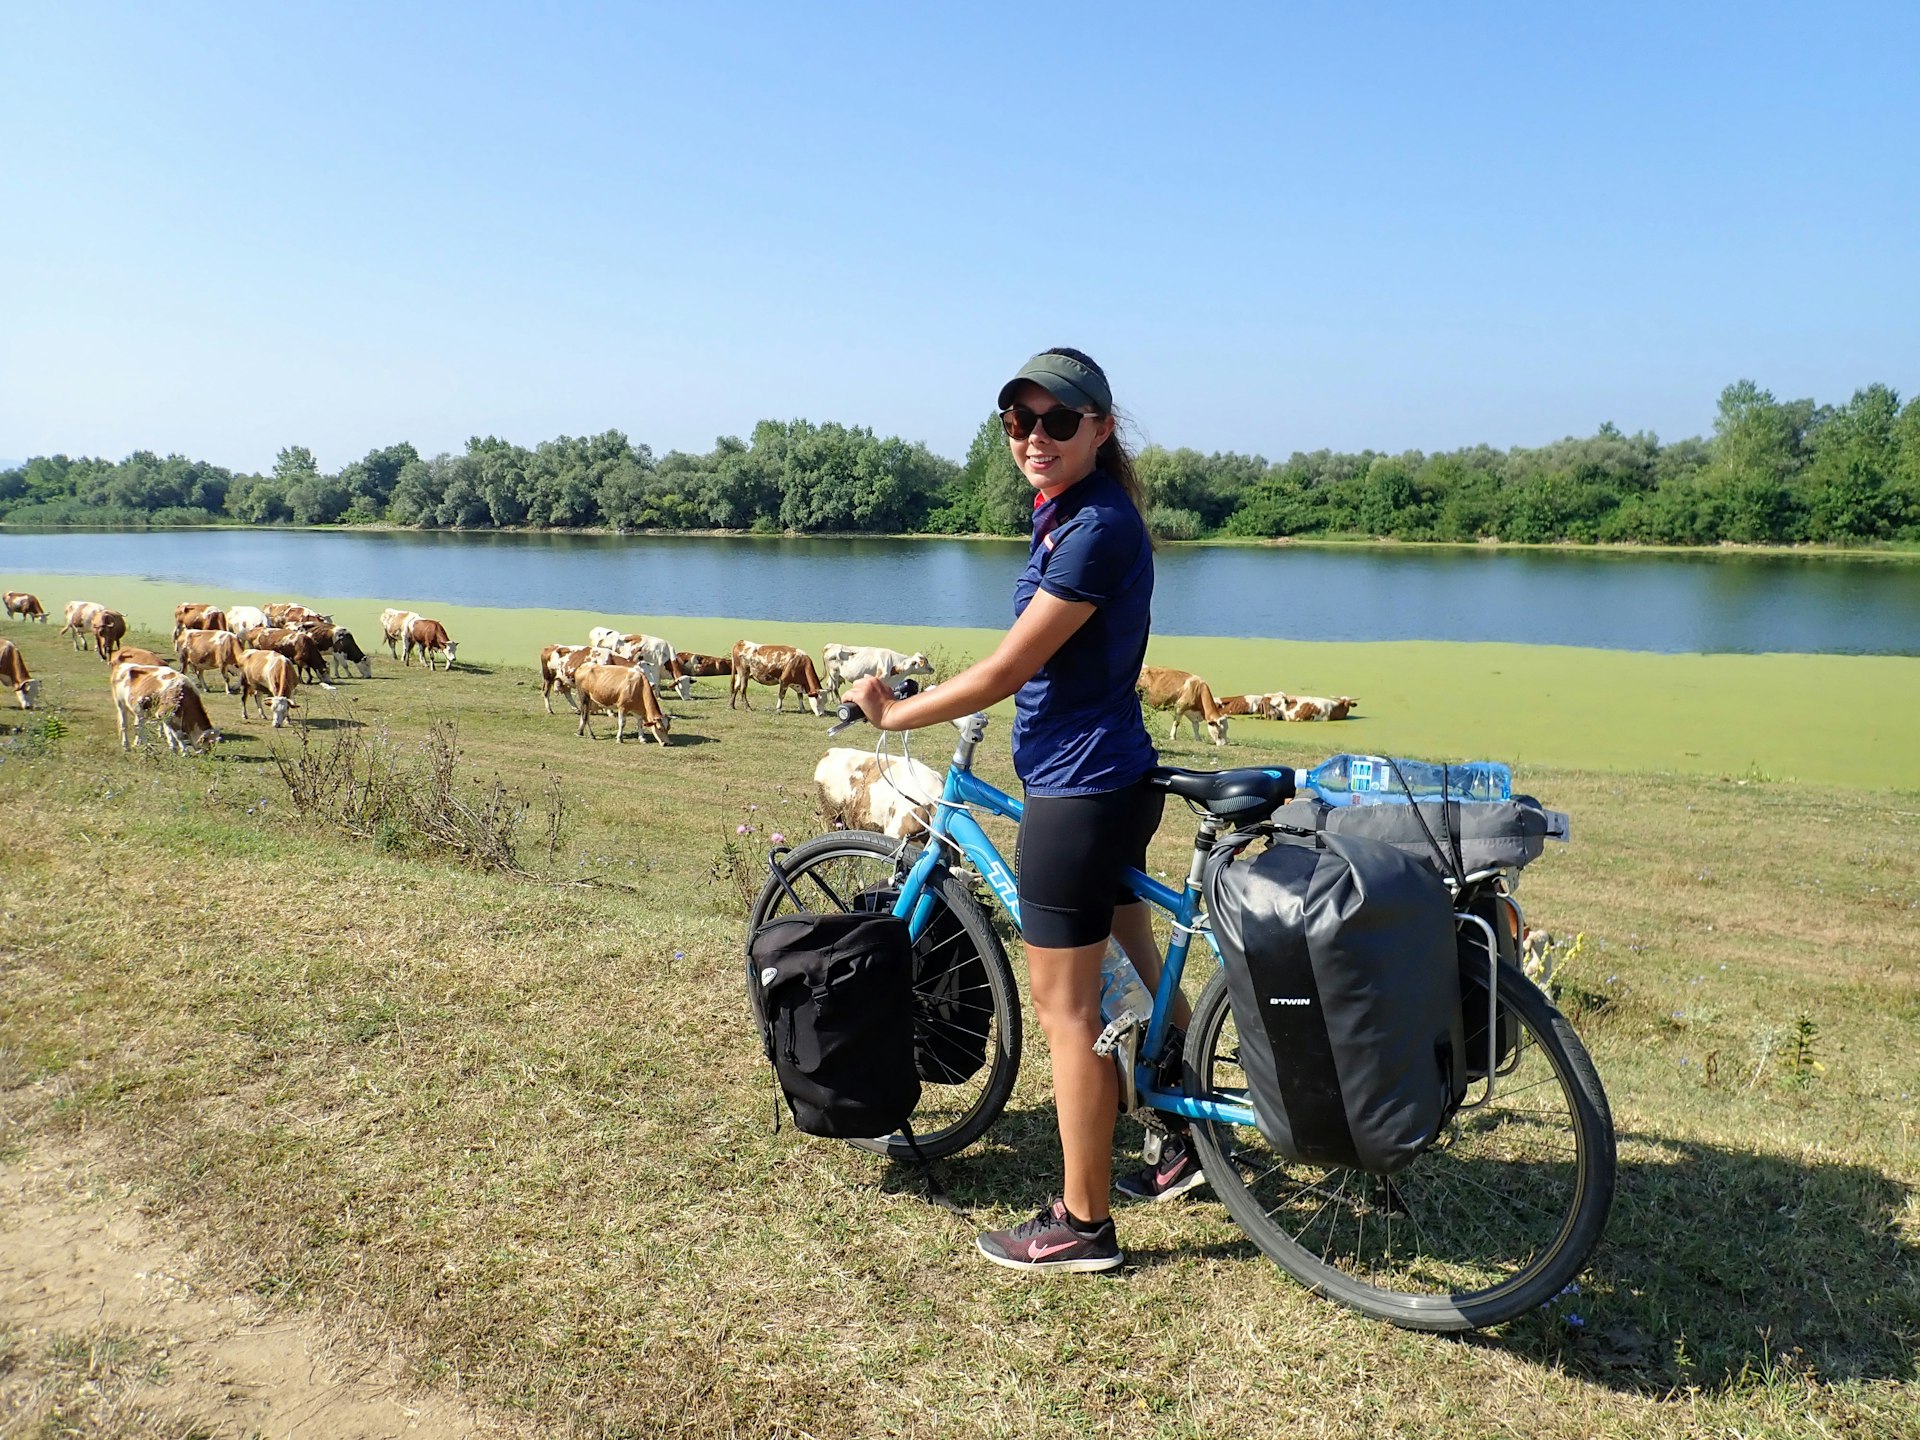 A woman with her bike pauses by a field of cows near a river